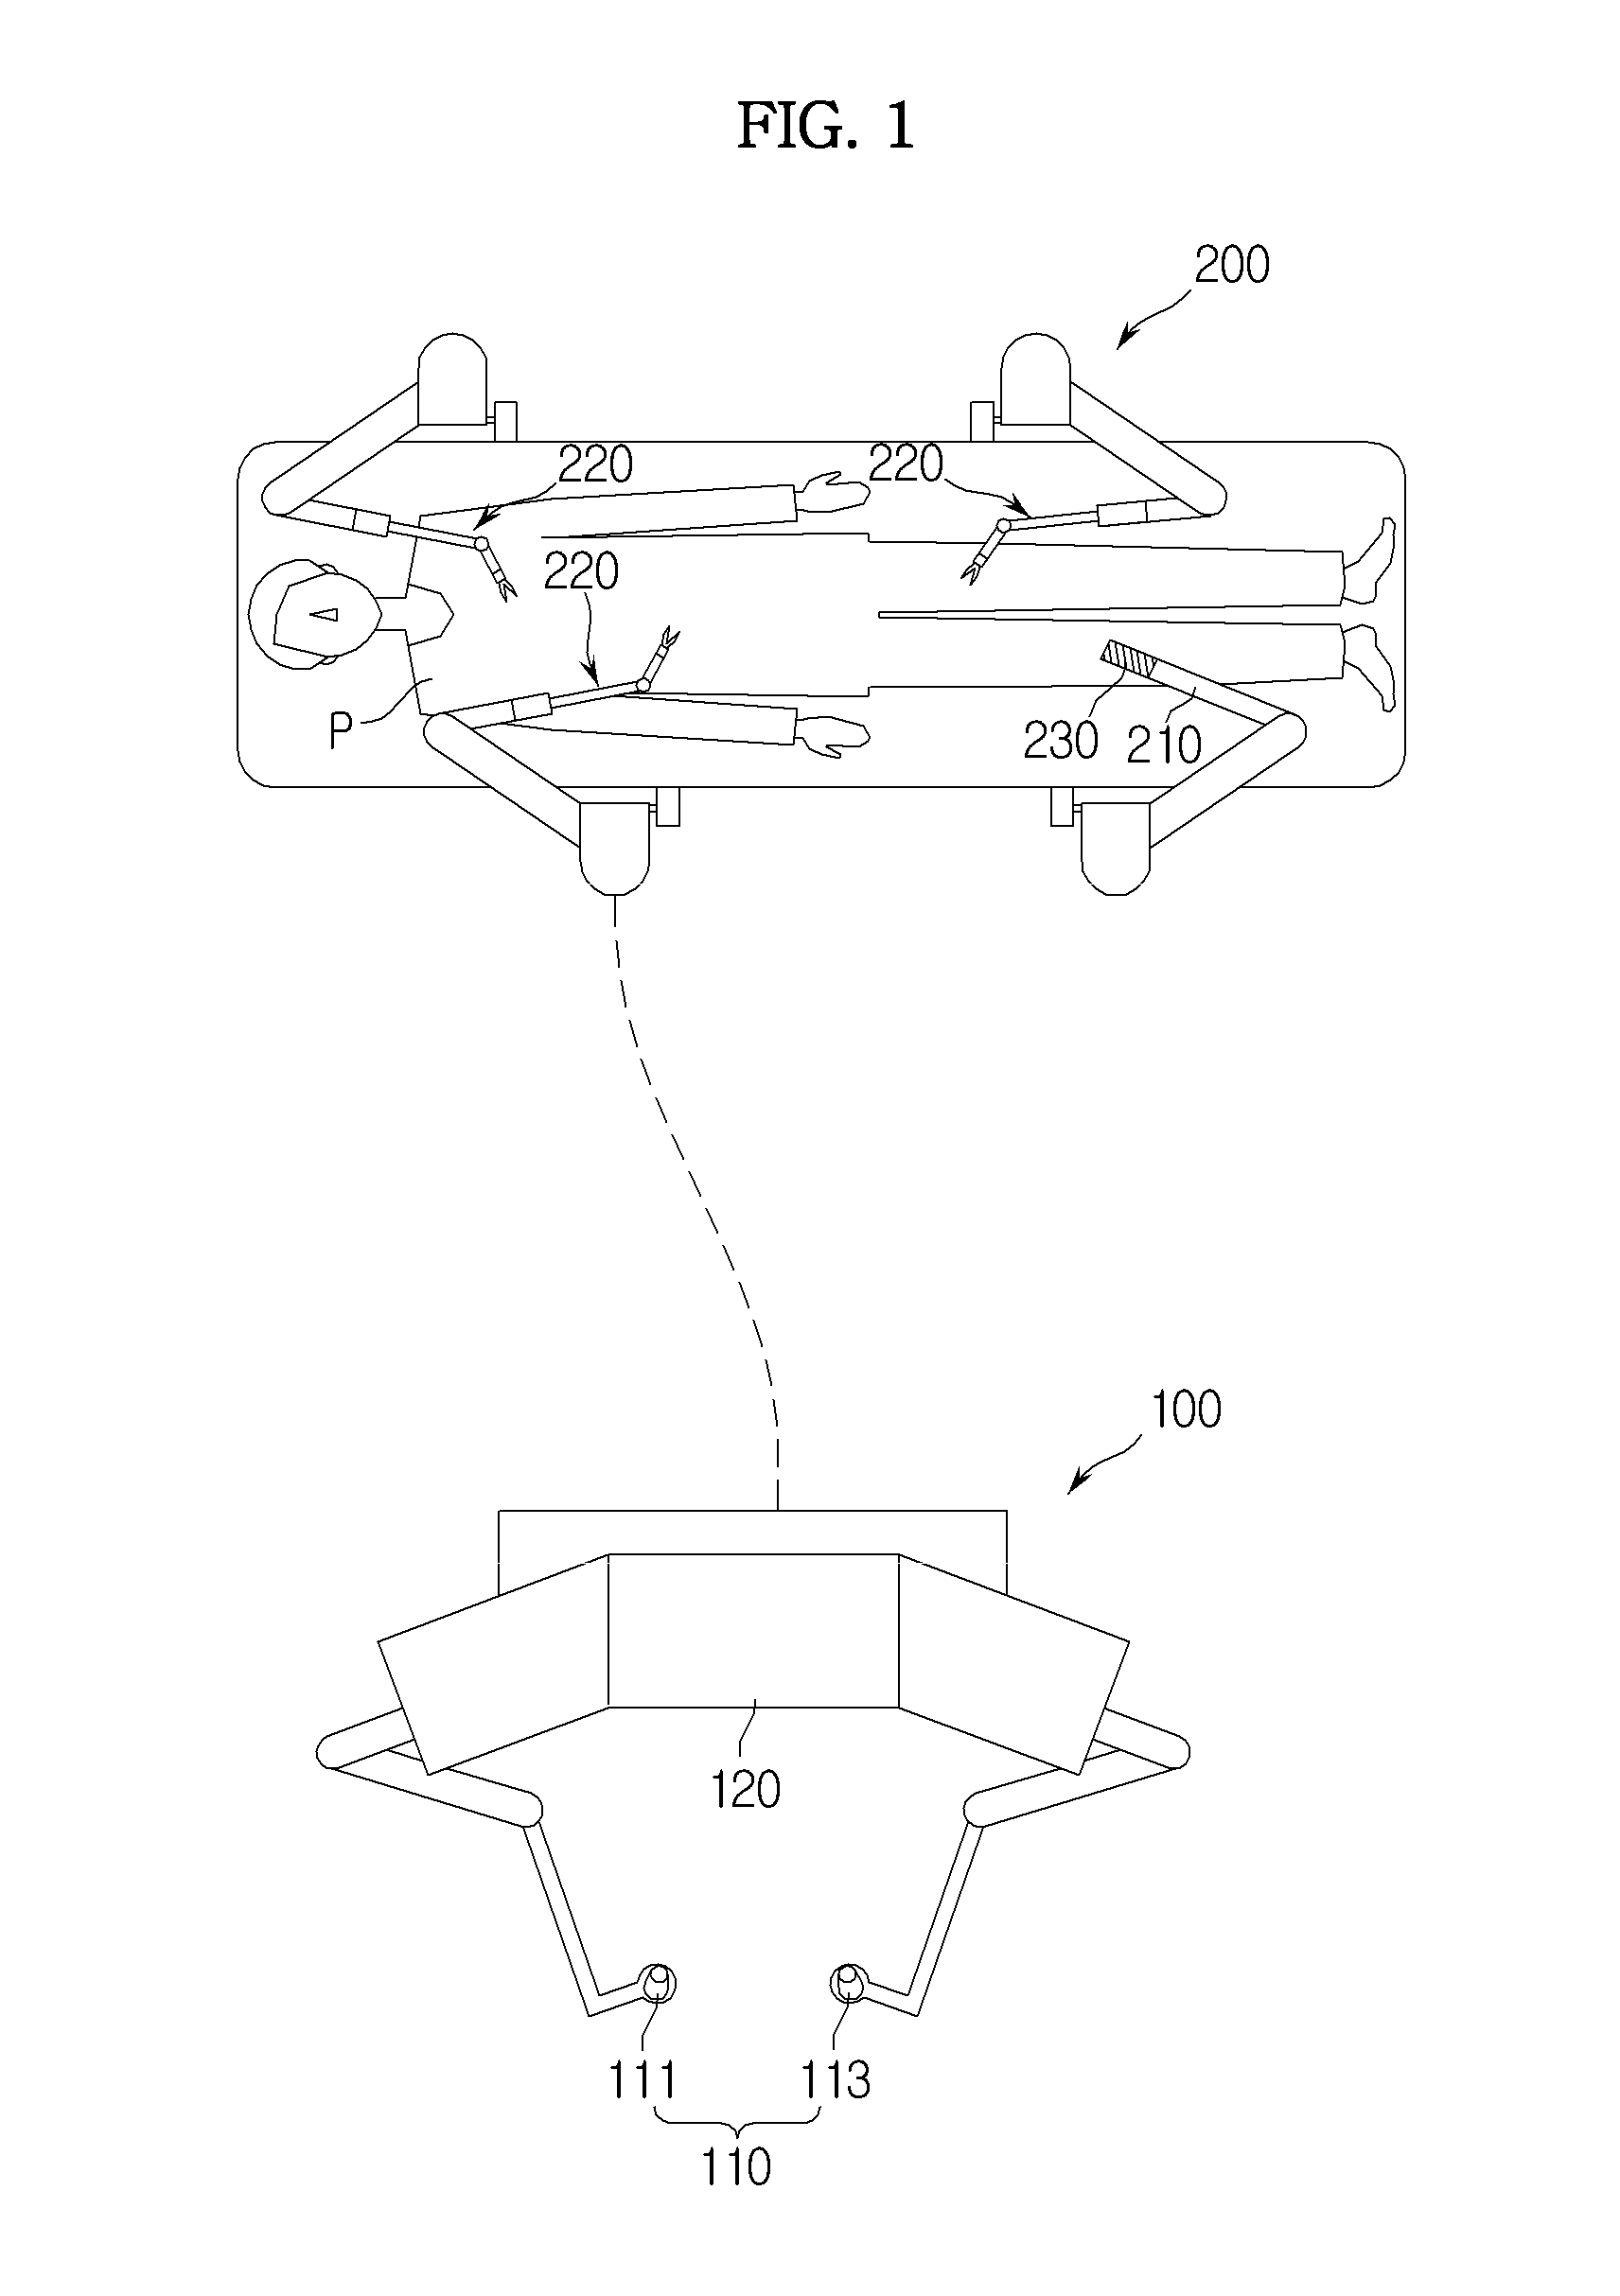 Control methods of single-port surgical robot